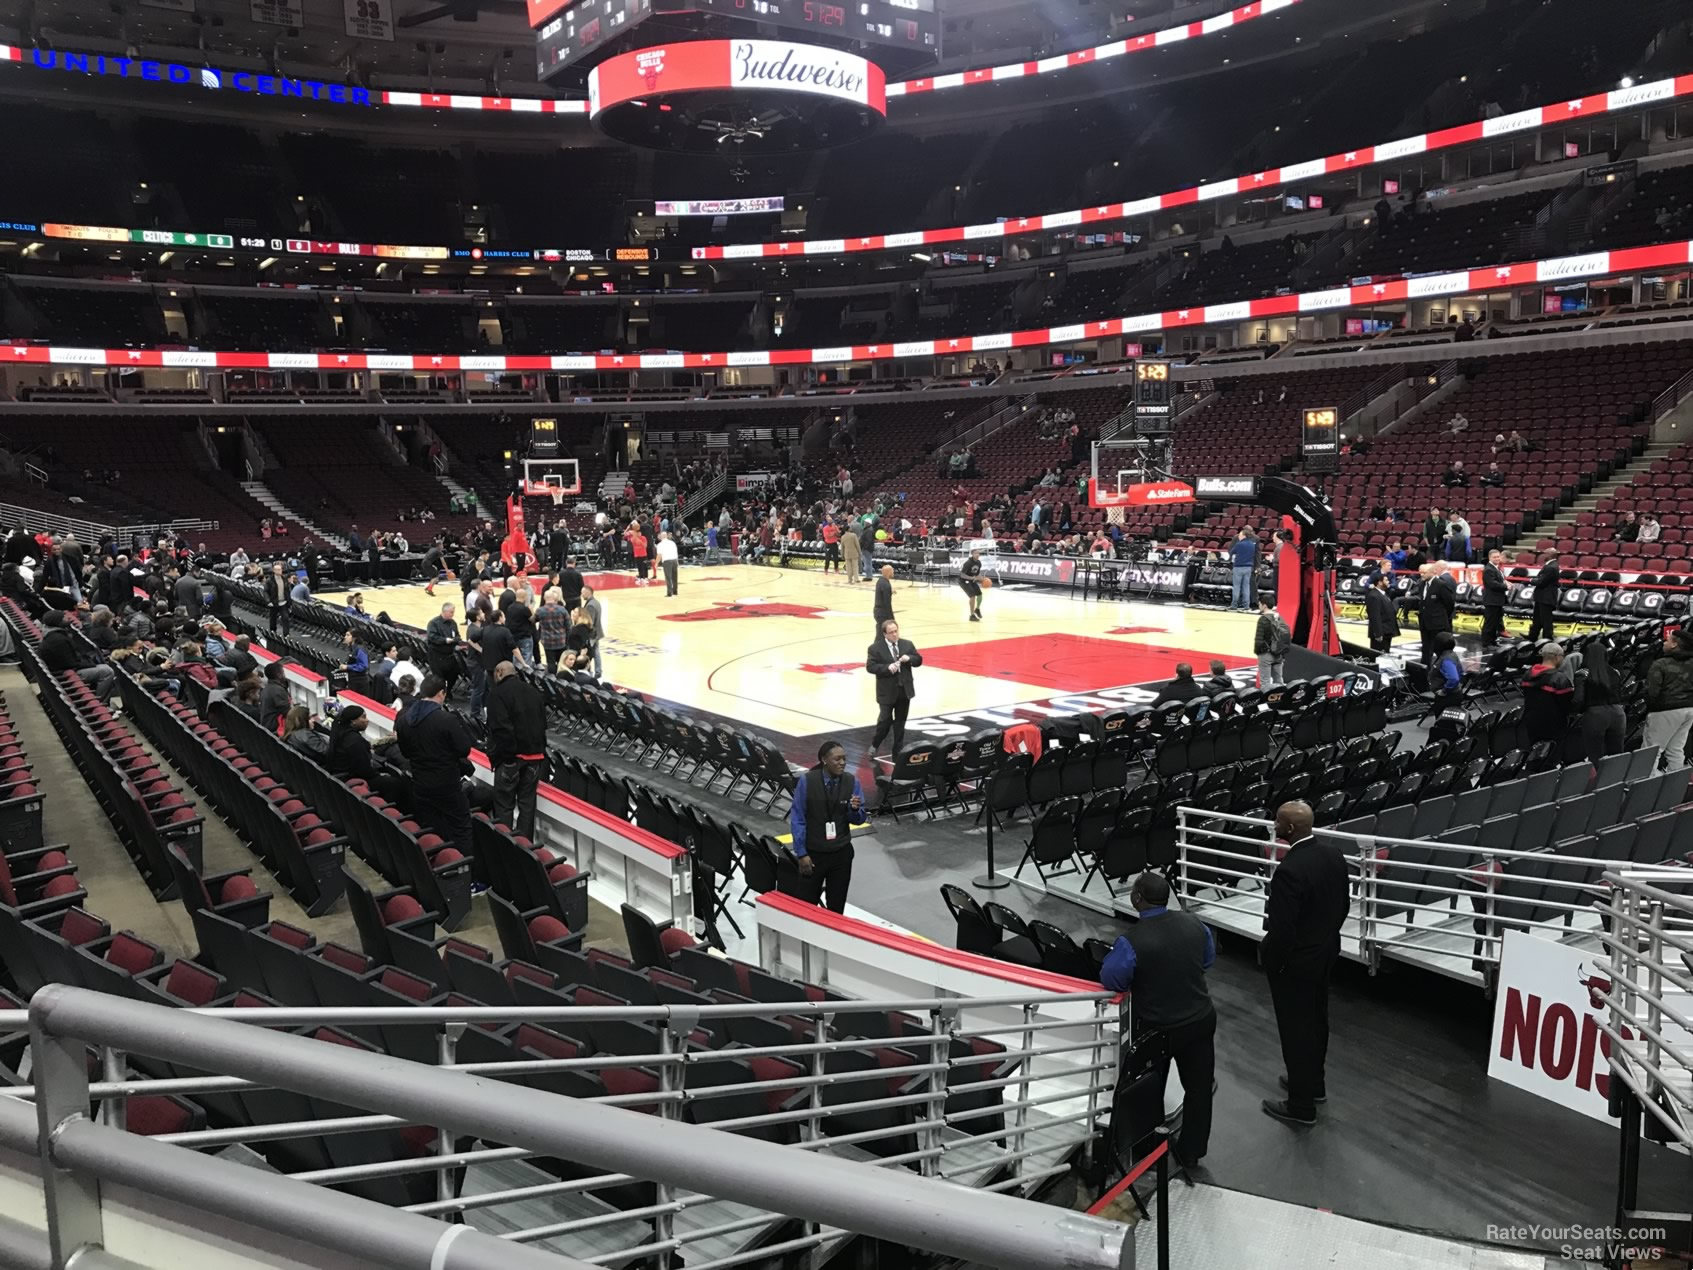 Section 108 at United Center - Chicago Bulls - RateYourSeats.com